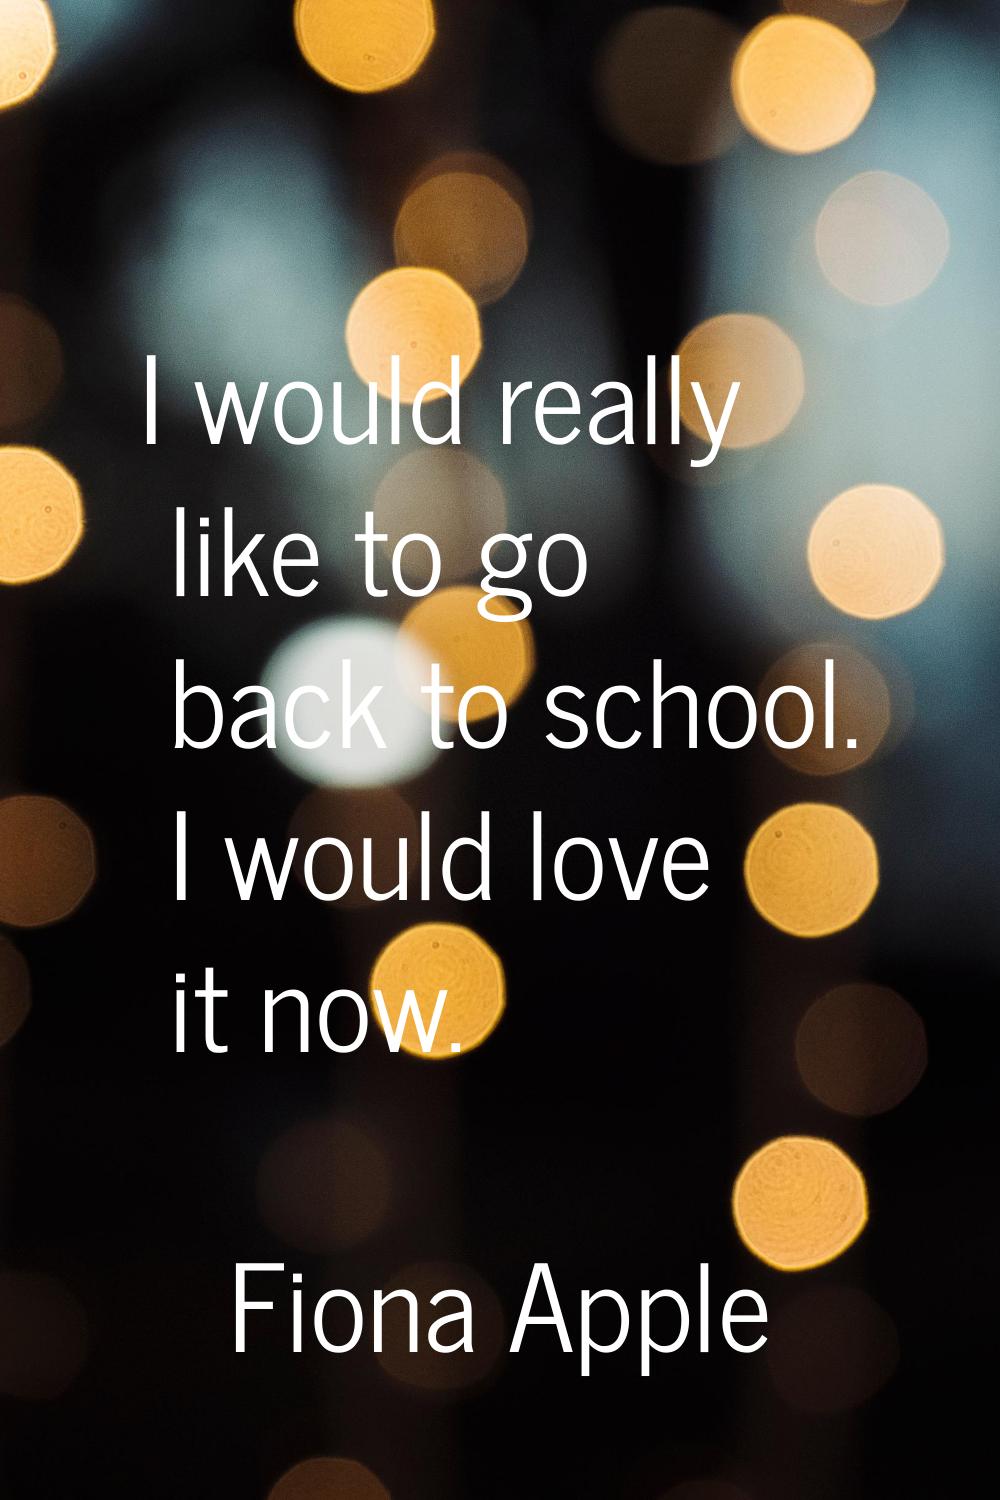 I would really like to go back to school. I would love it now.